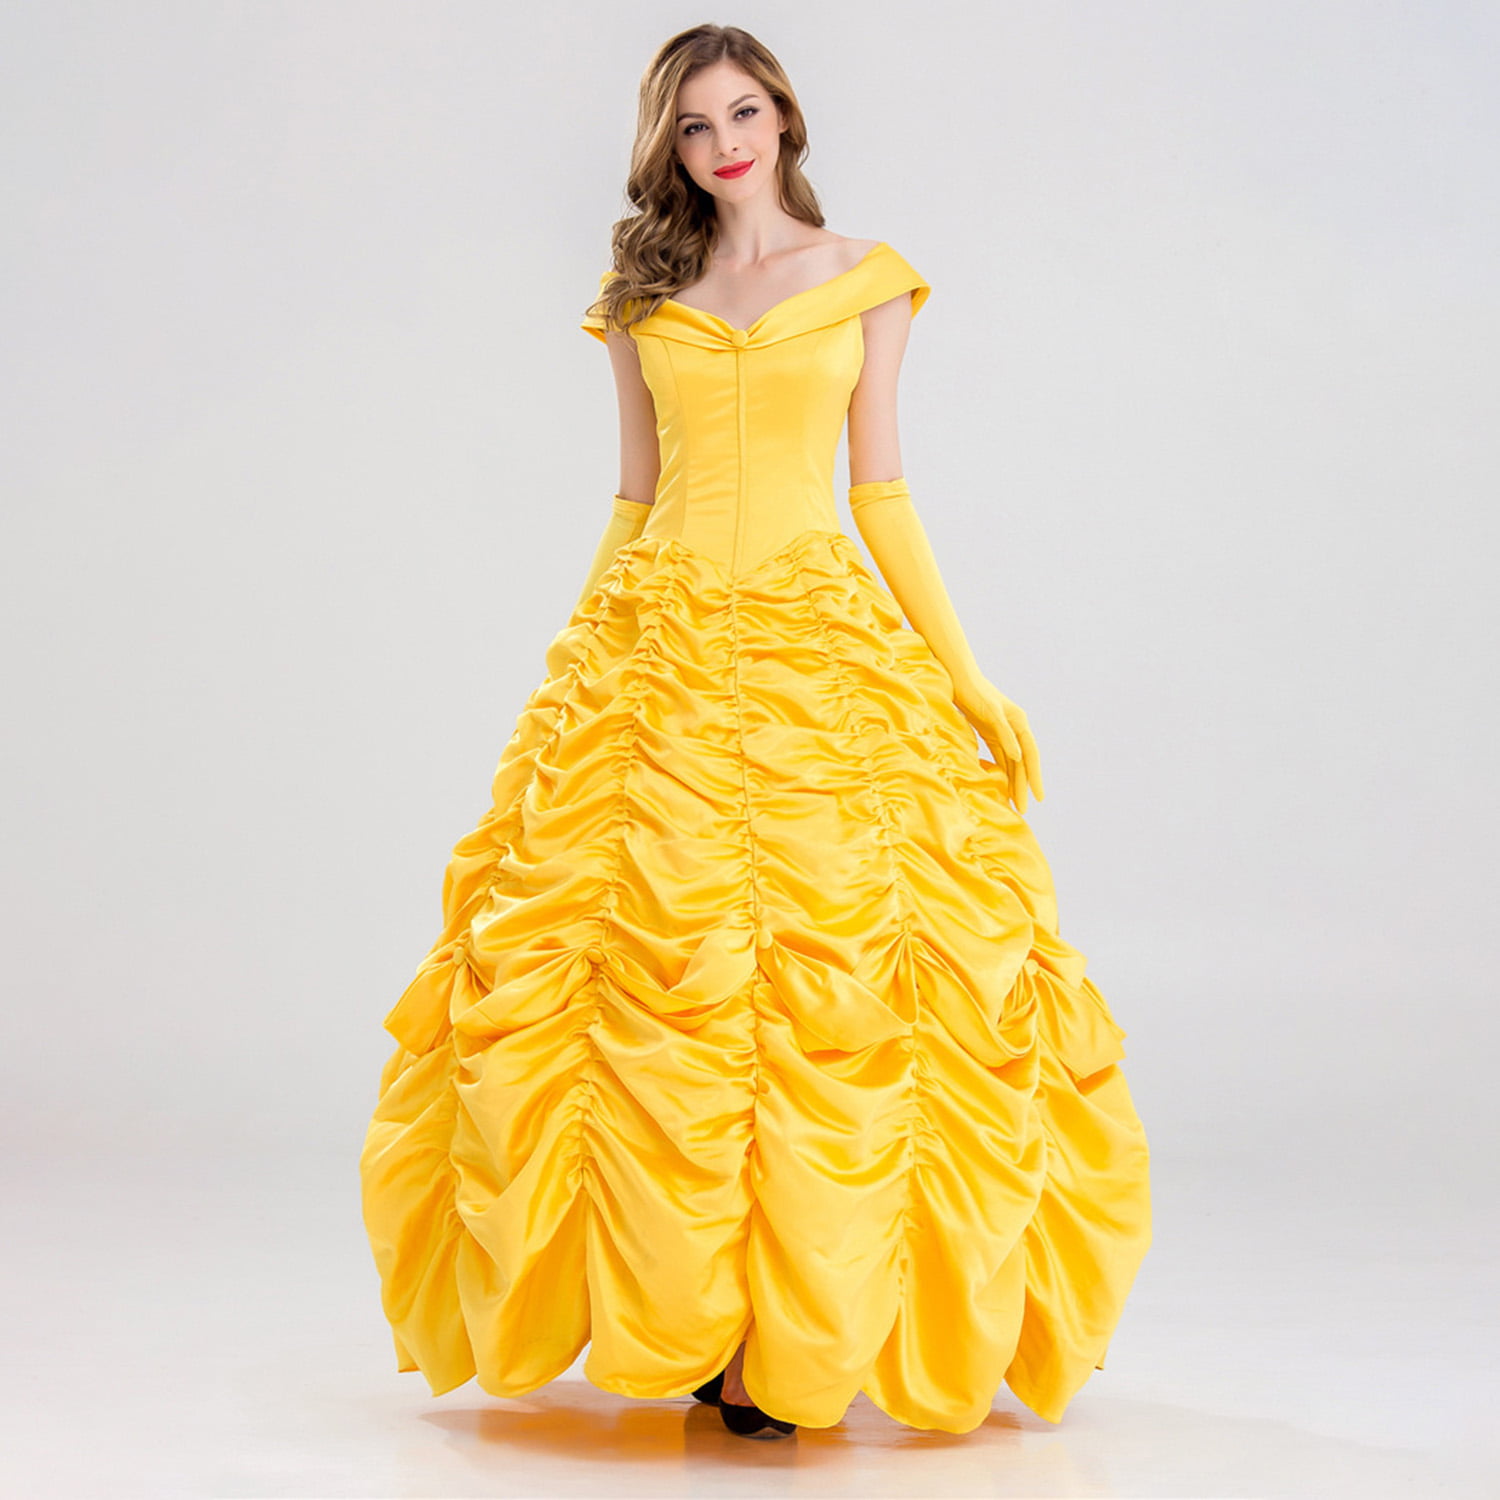 Yellow Long Prom Dress with Appliques Princess Formal Dress – Pgmdress